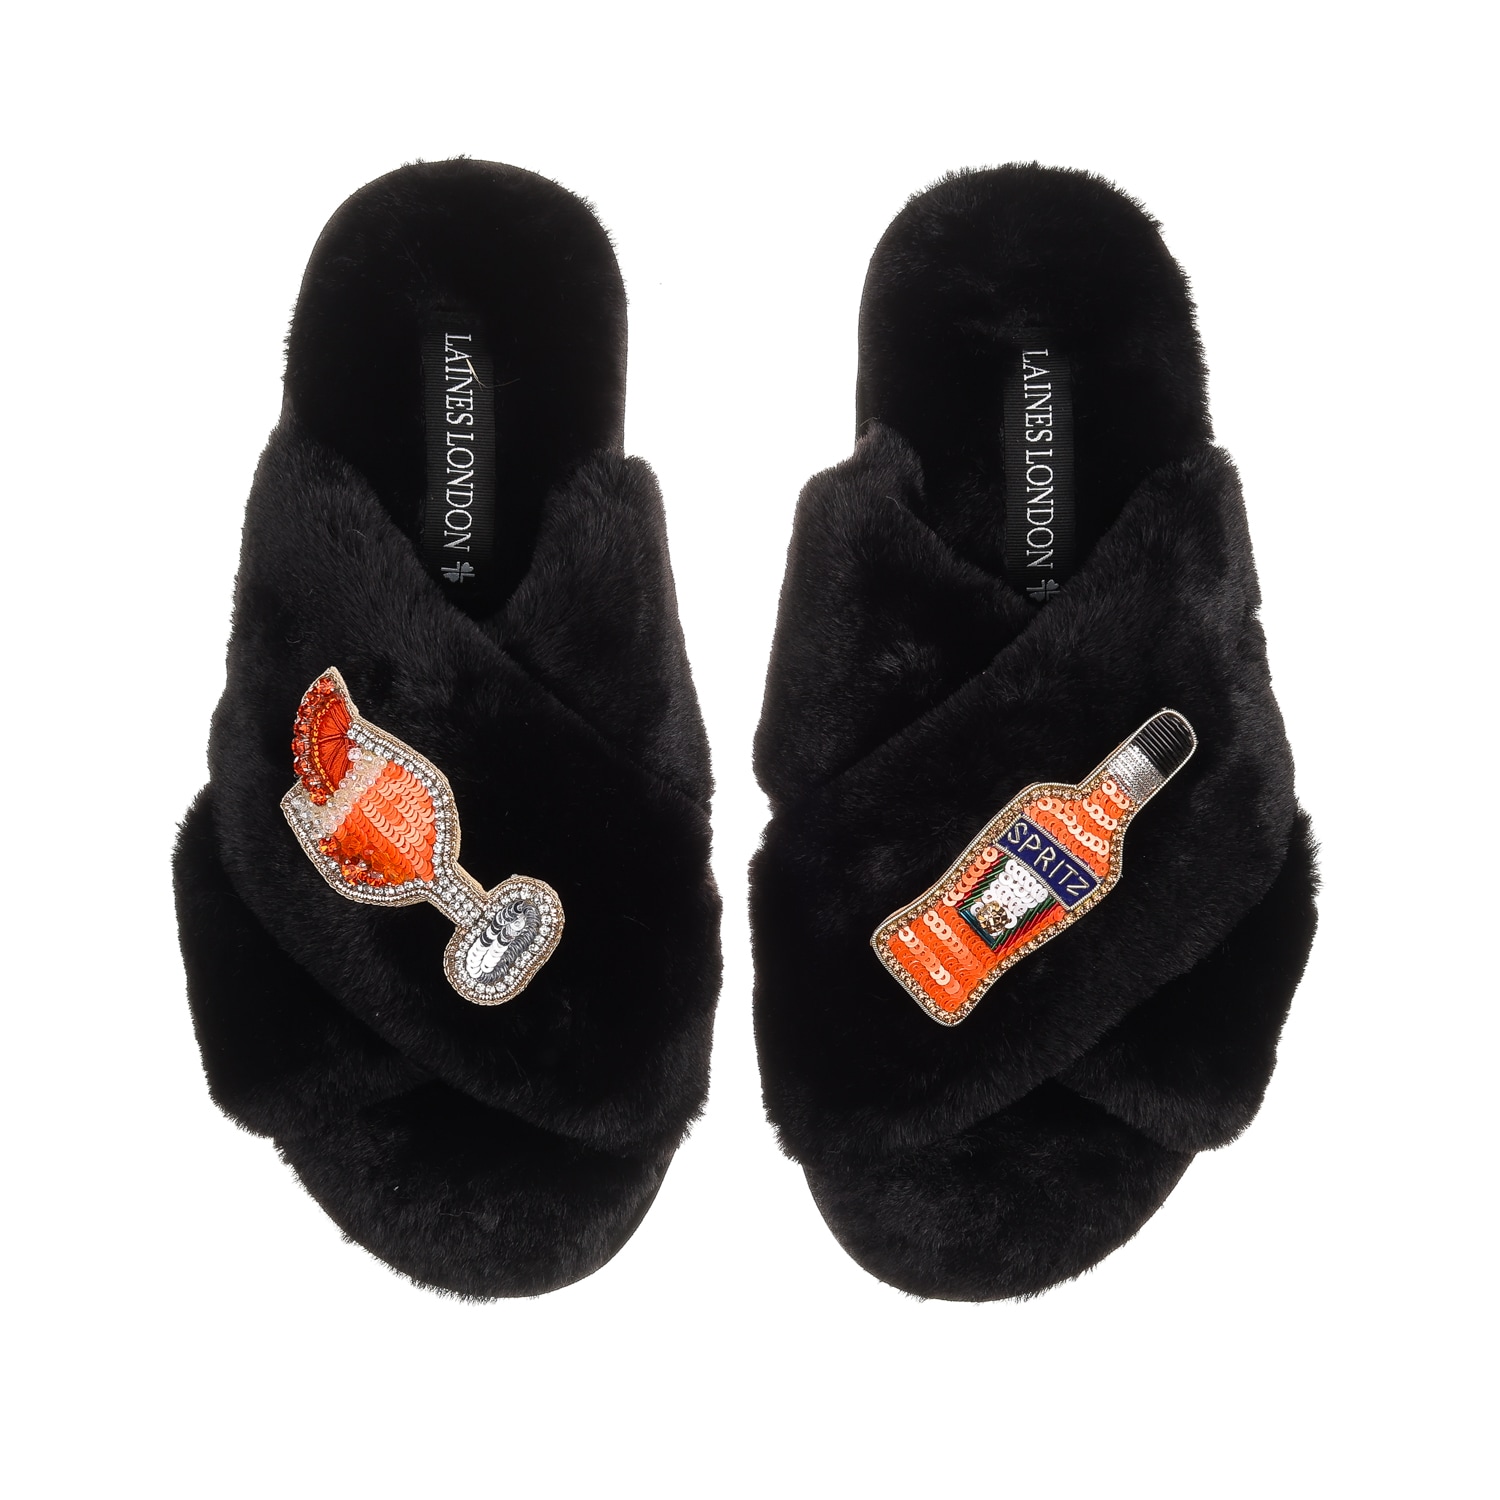 Laines London Women's Classic Laines Slippers With Summer Spritz Brooches - Black